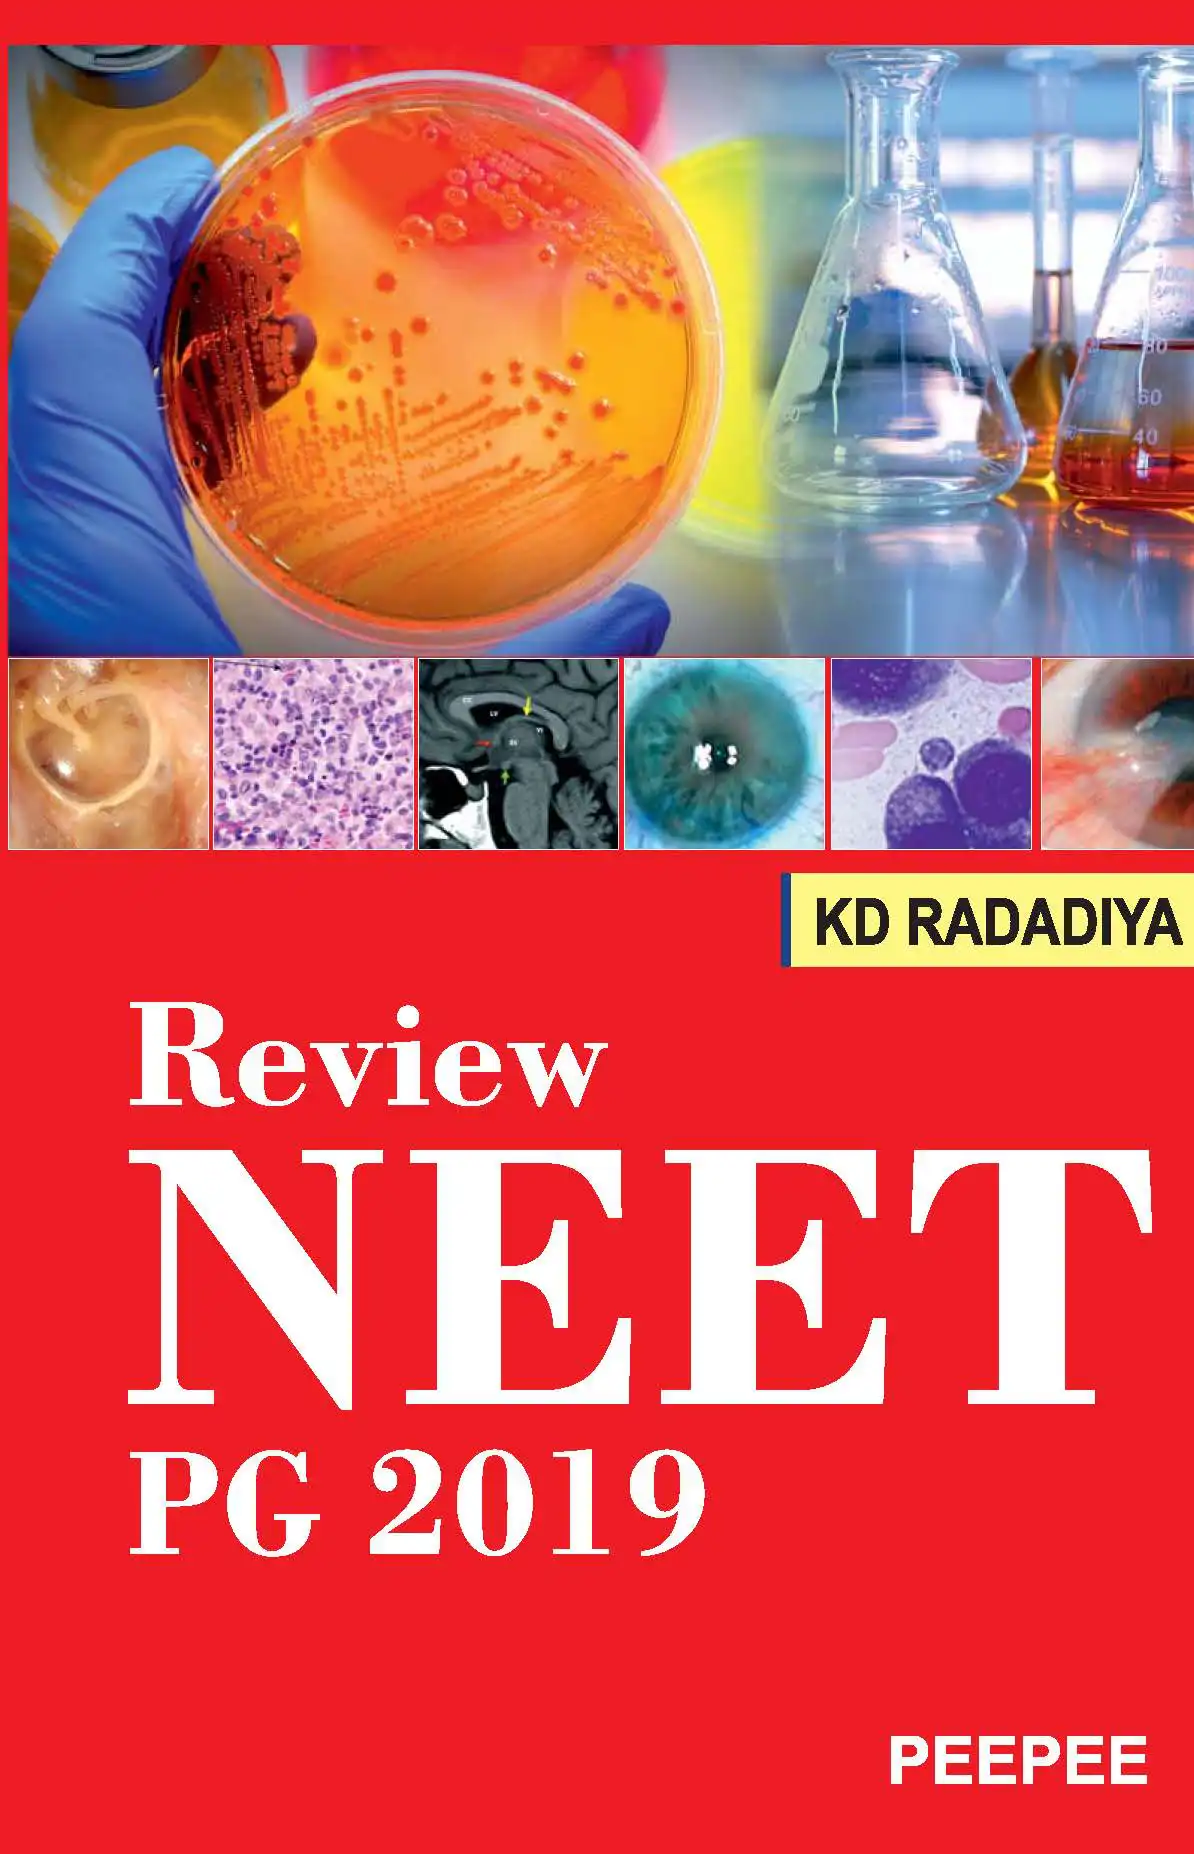 Cover Image of REVIEW NEET PG